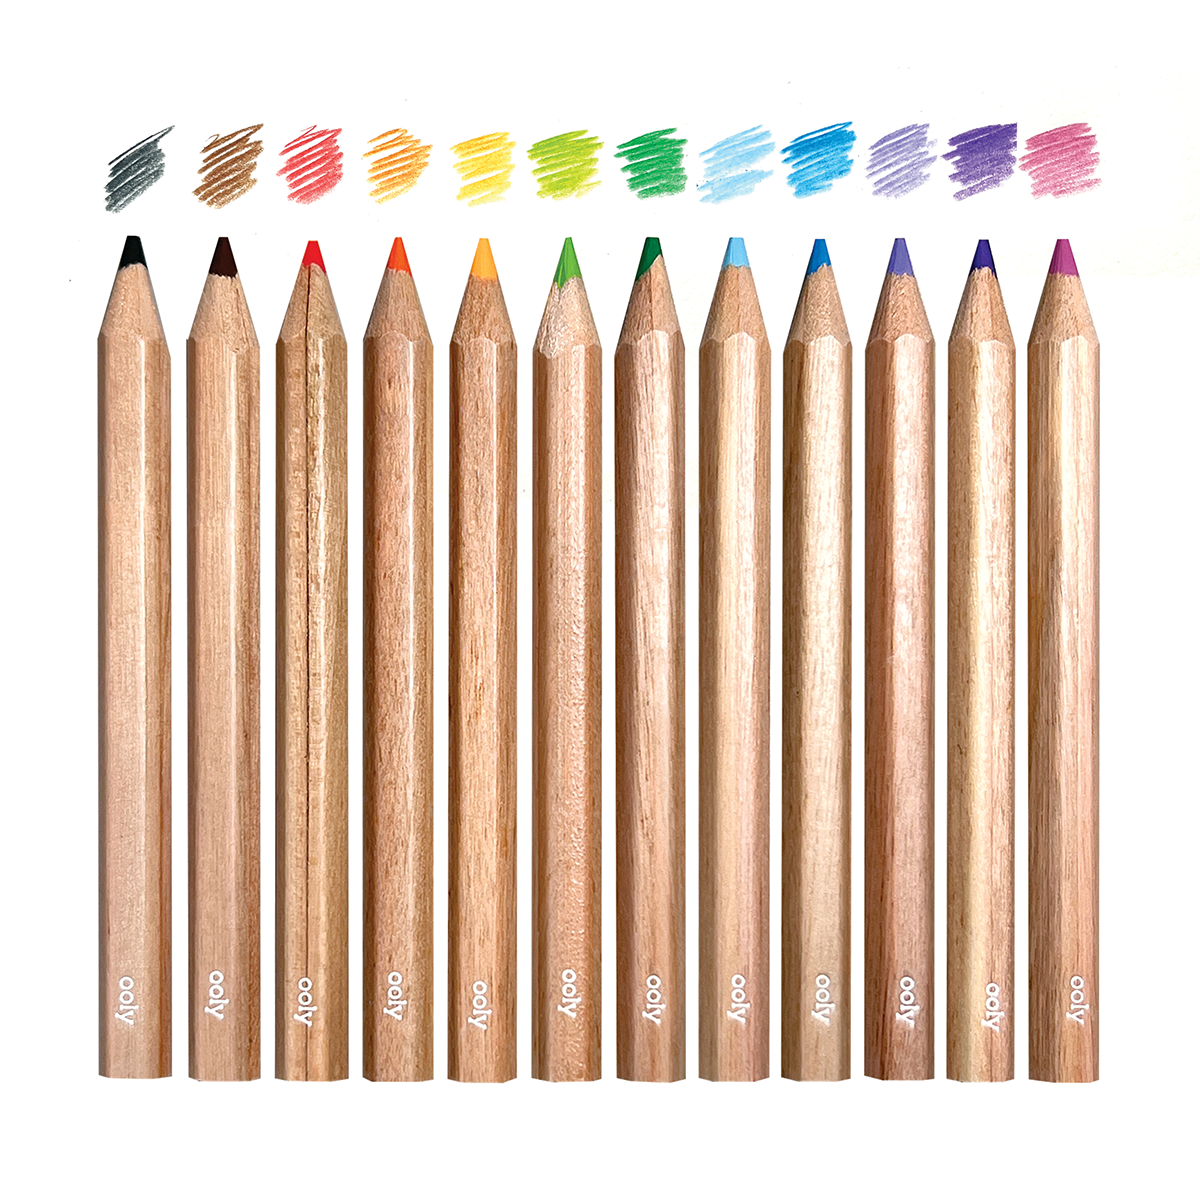 OOLY Draw 'n Doodle Mini Colored Pencils and Sharpener out of packaging with color sqatches